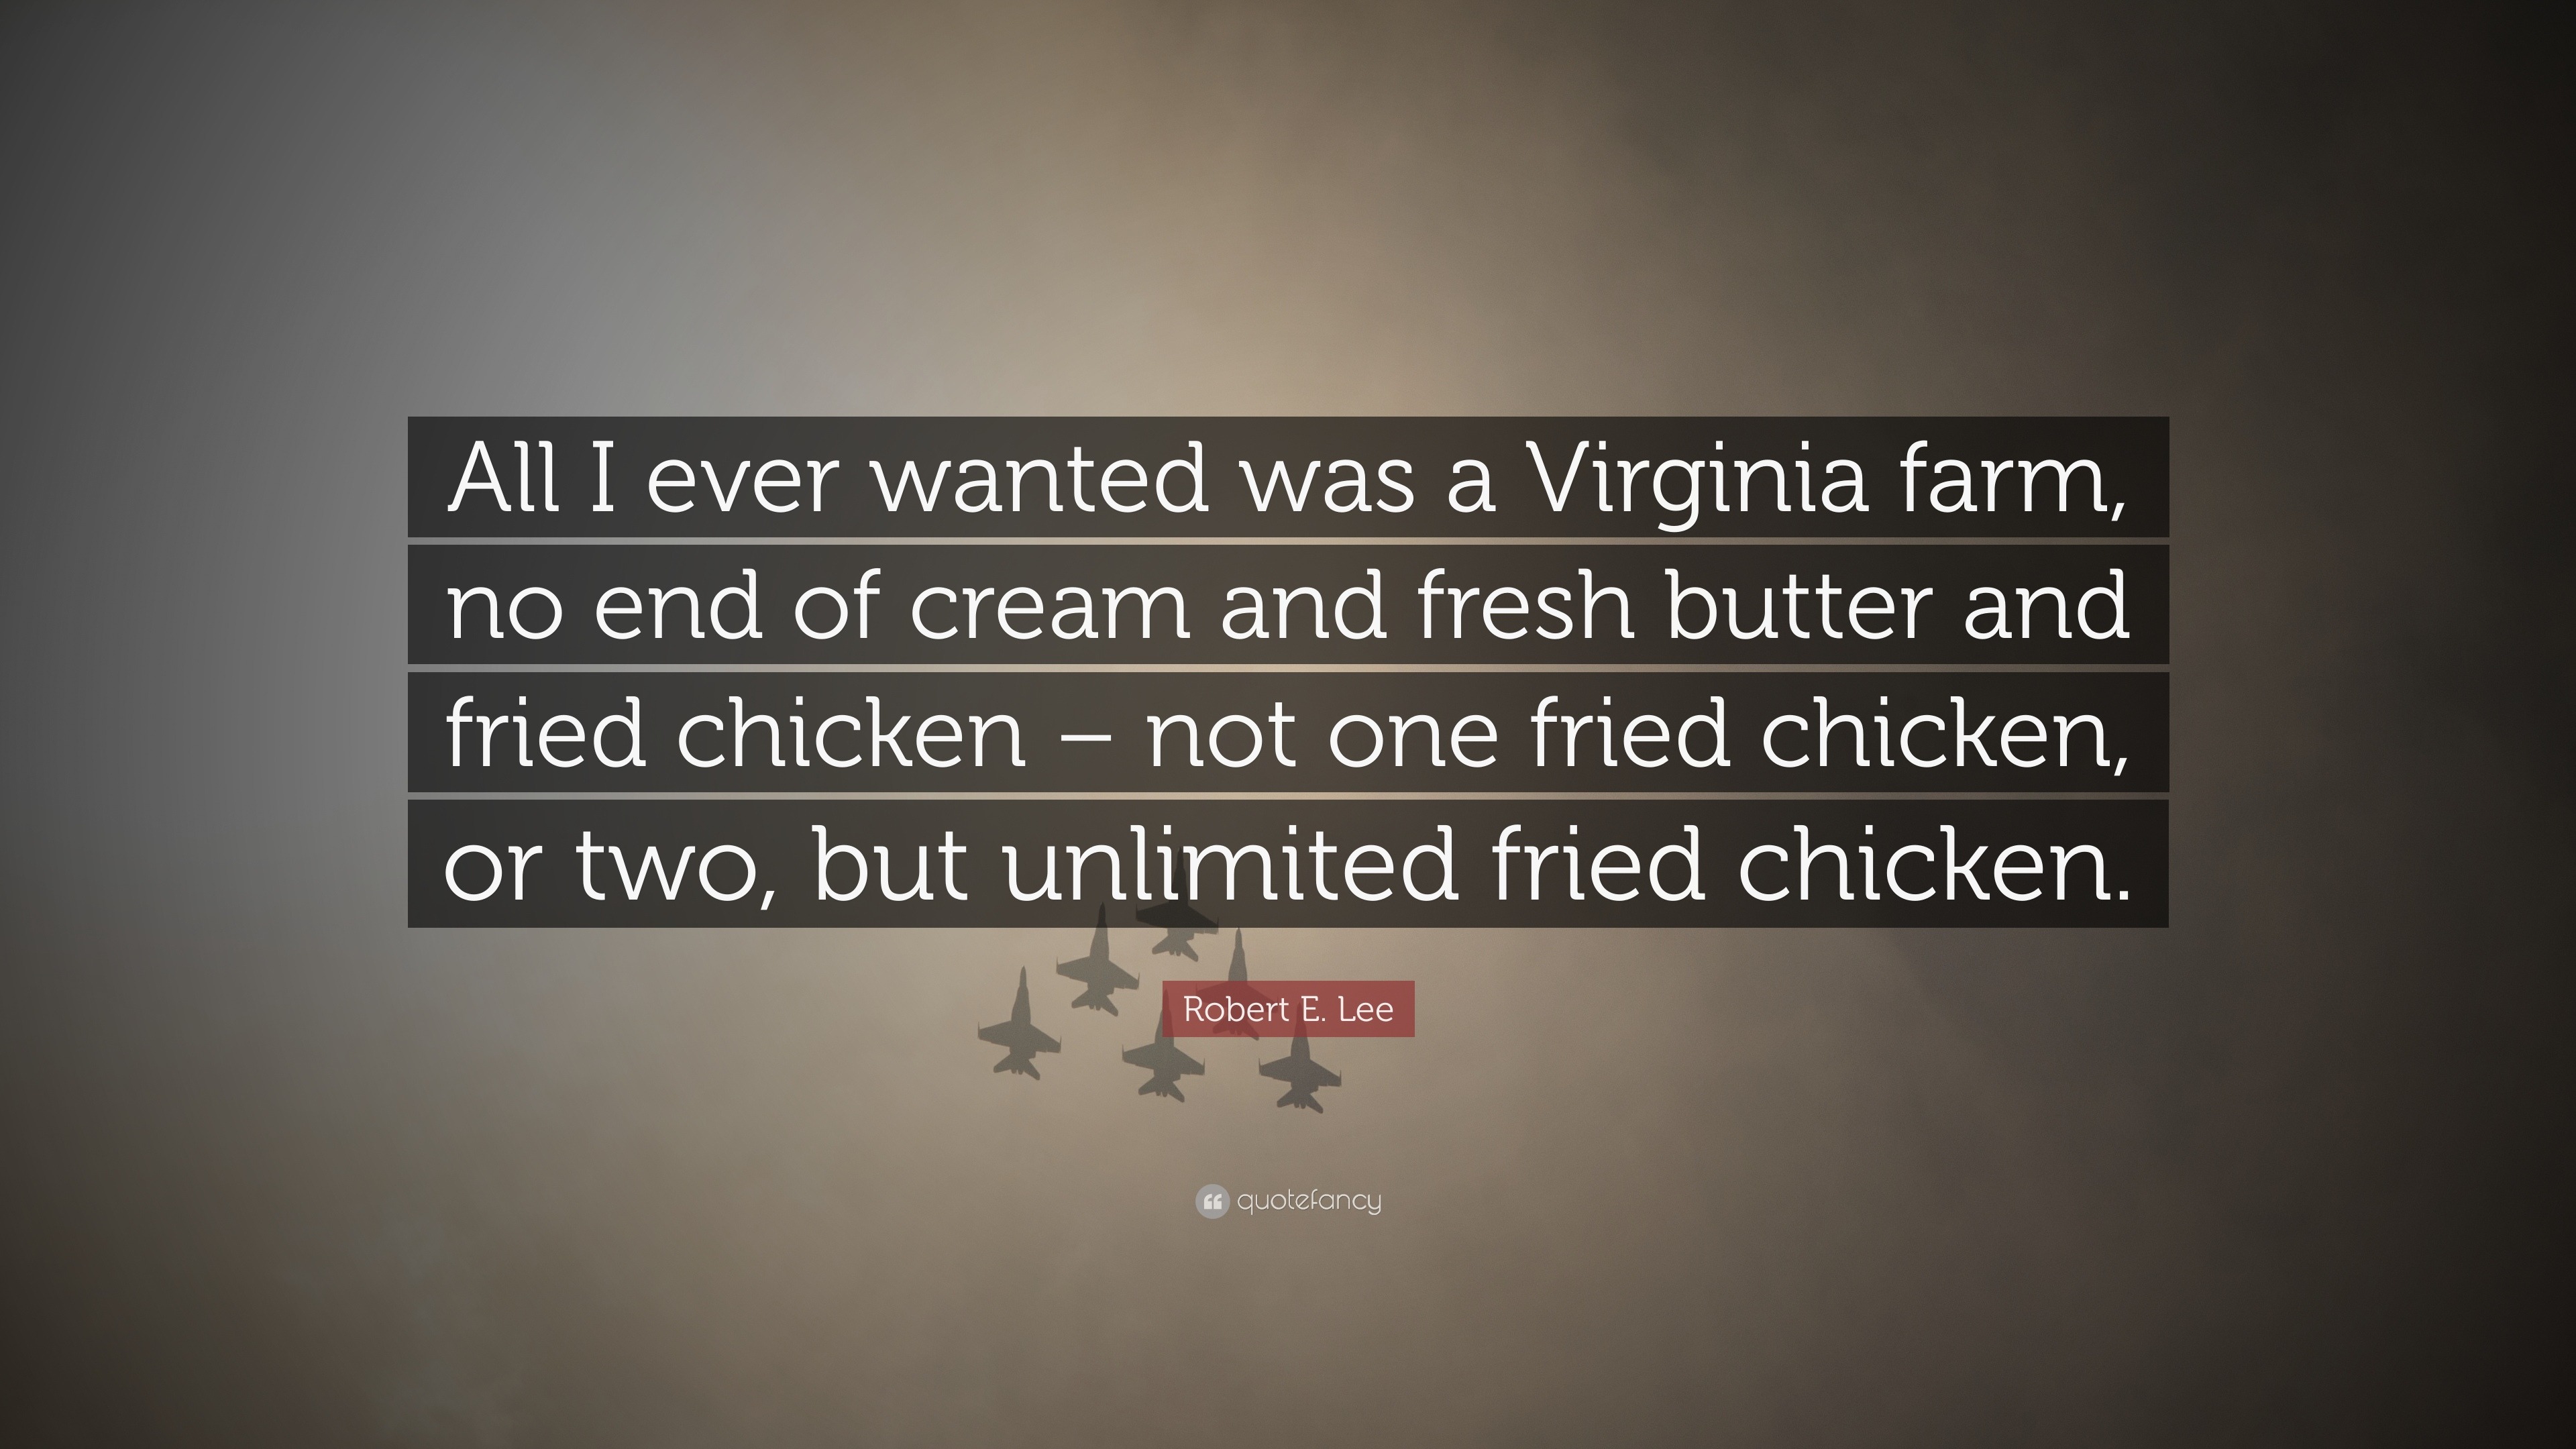 Robert E. Lee Quote: “All I ever wanted was a Virginia farm, no end of  cream and fresh butter and fried chicken – not one fried chicken, or tw...”